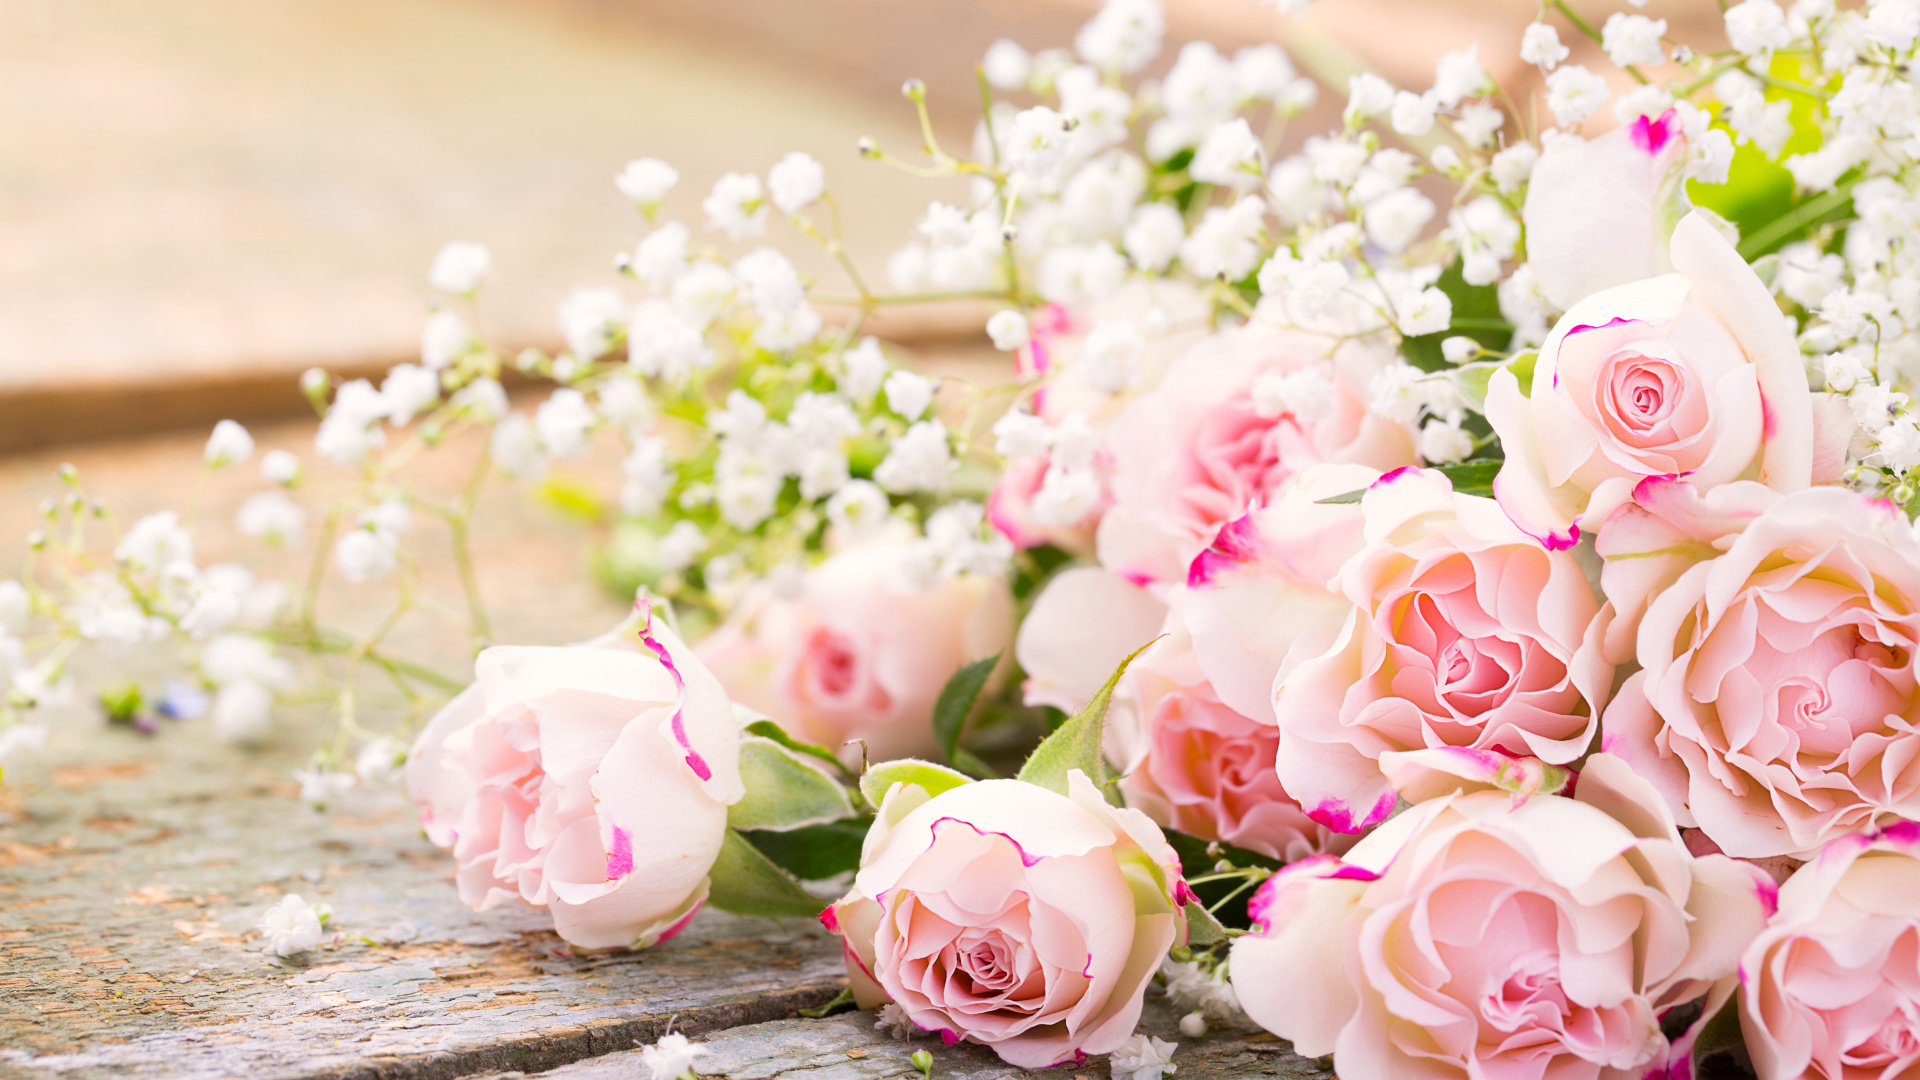 Pink and White Roses Bouquet. Wallpaper in 1920x1080 Resolution